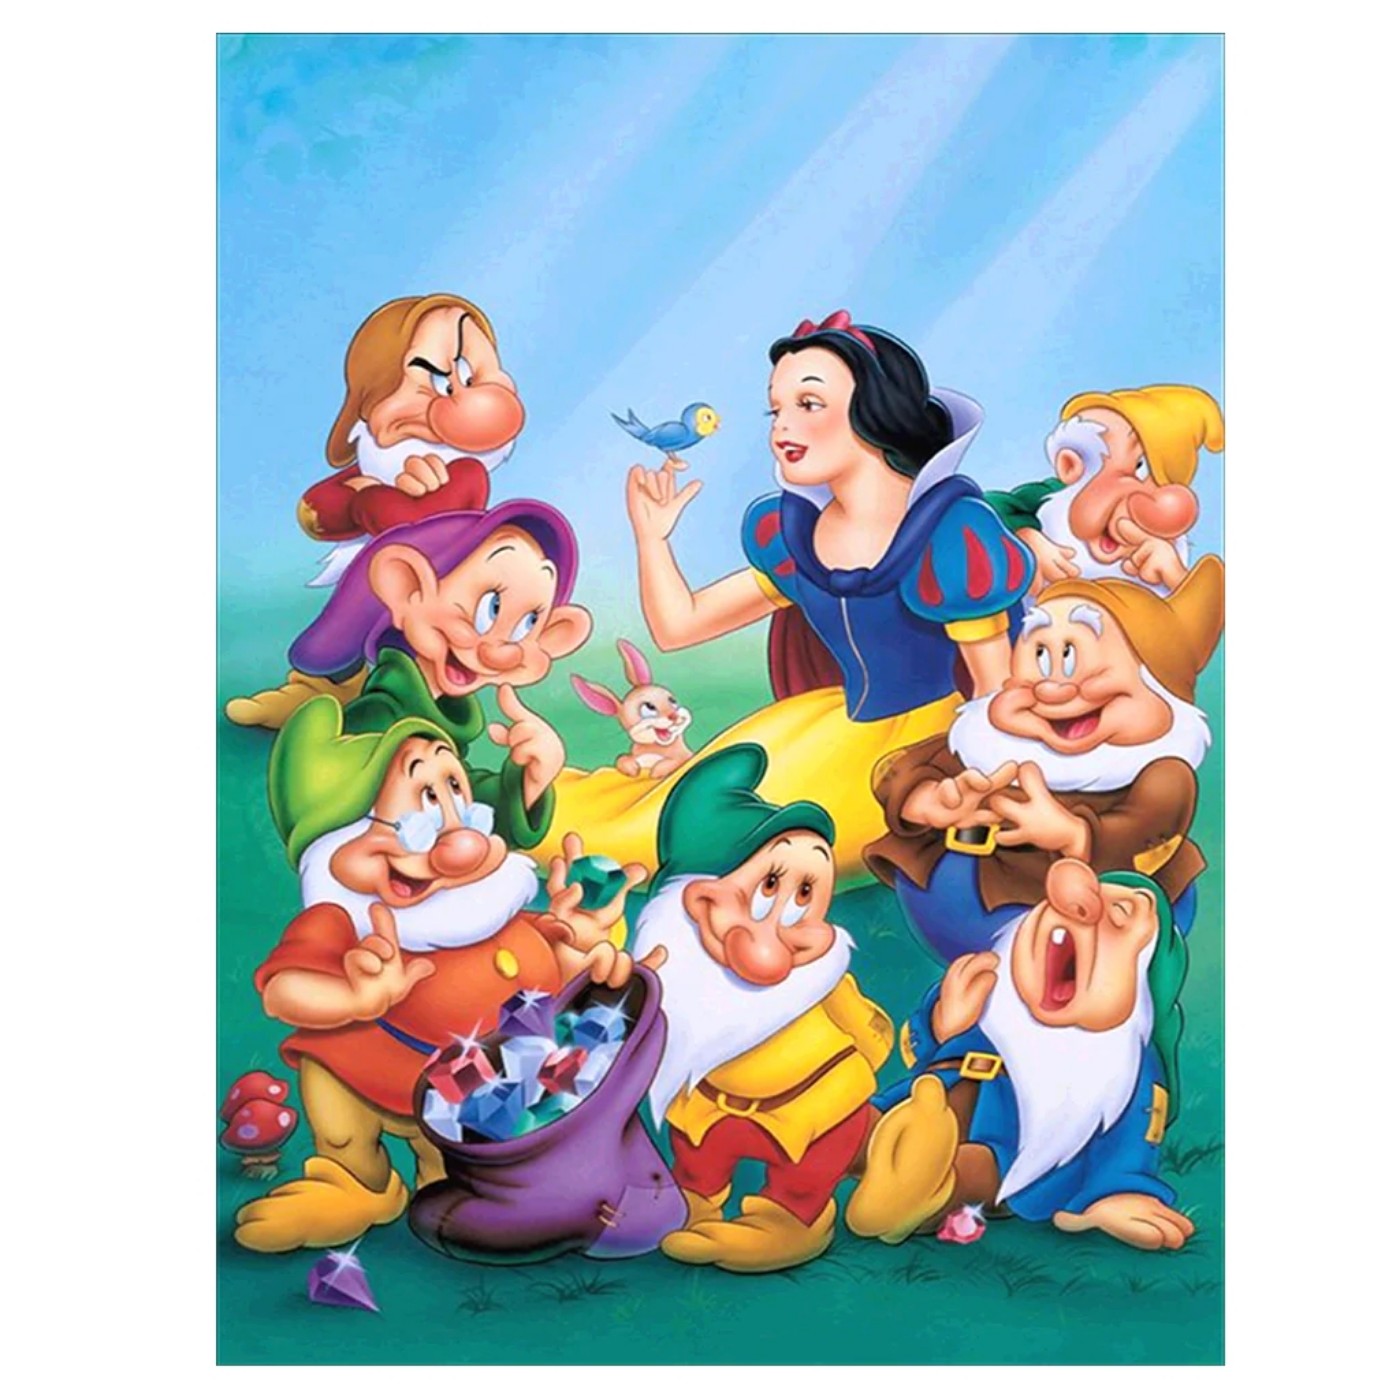 Snow White And The Seven Dwarfs Full Movie In Hindi Free Download | Podcast  on SoundOn